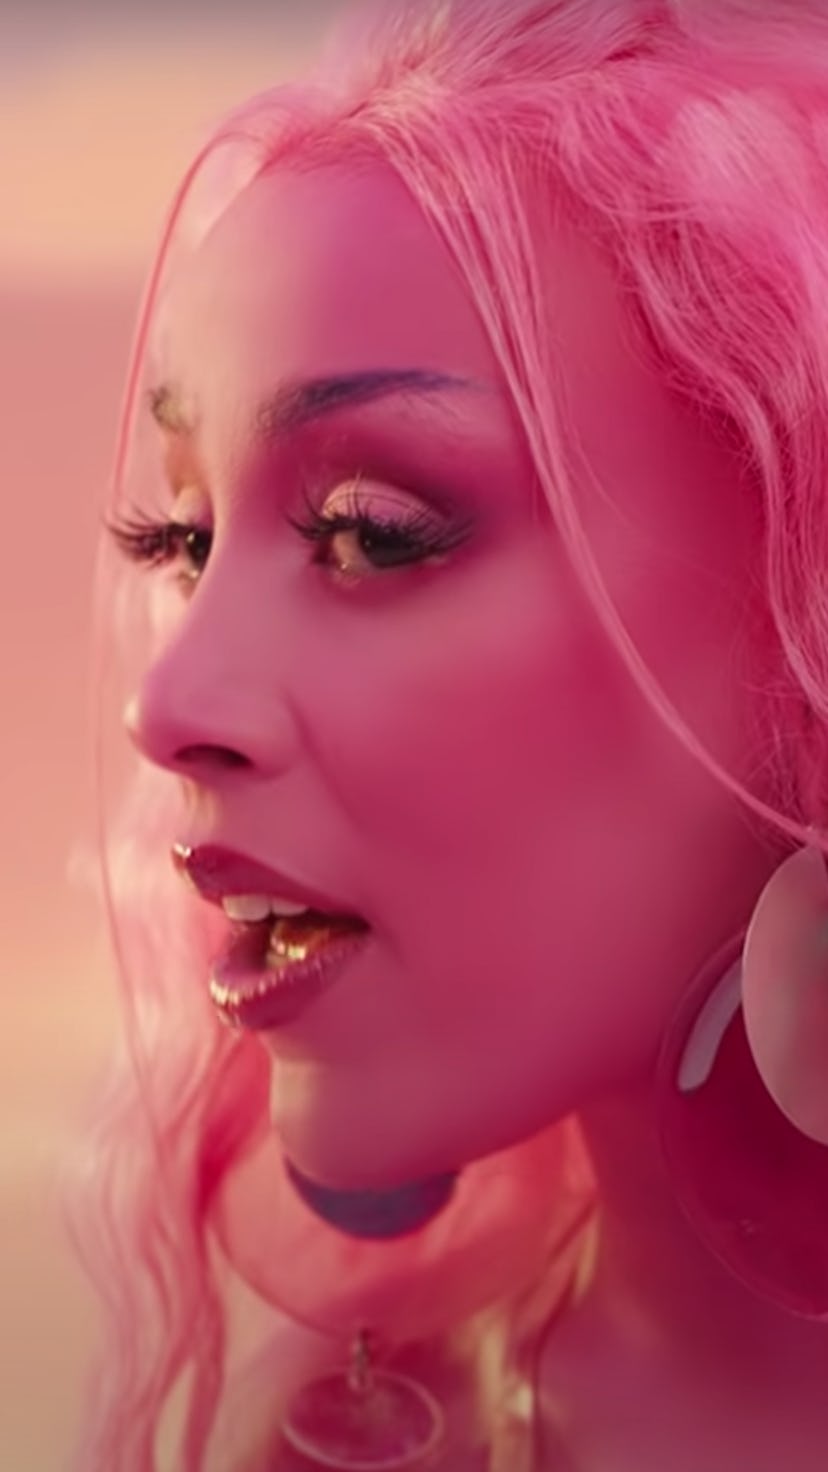 Doja Cat with pink hair for the "Kiss me More" video